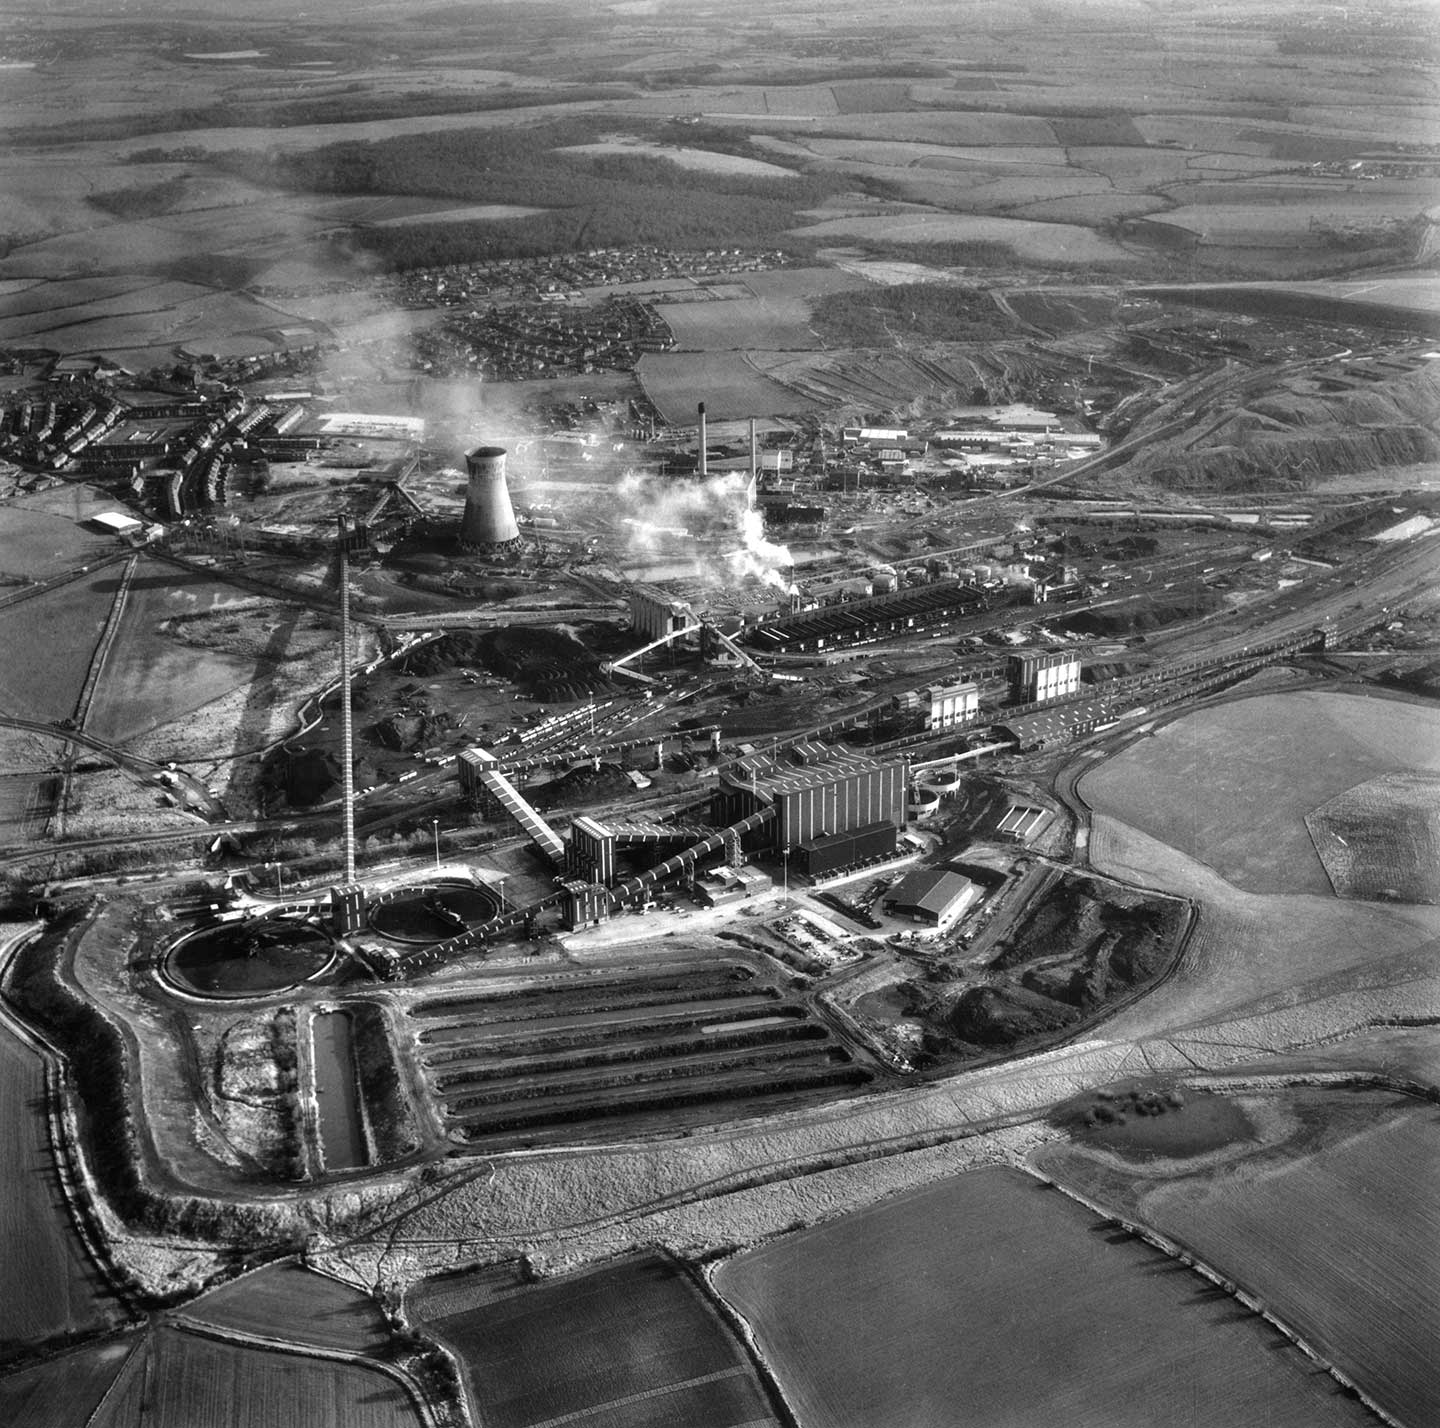 Black and white aerial photo showing an industrial complex with buildings, walkways, roads, chimneys and spoil tips